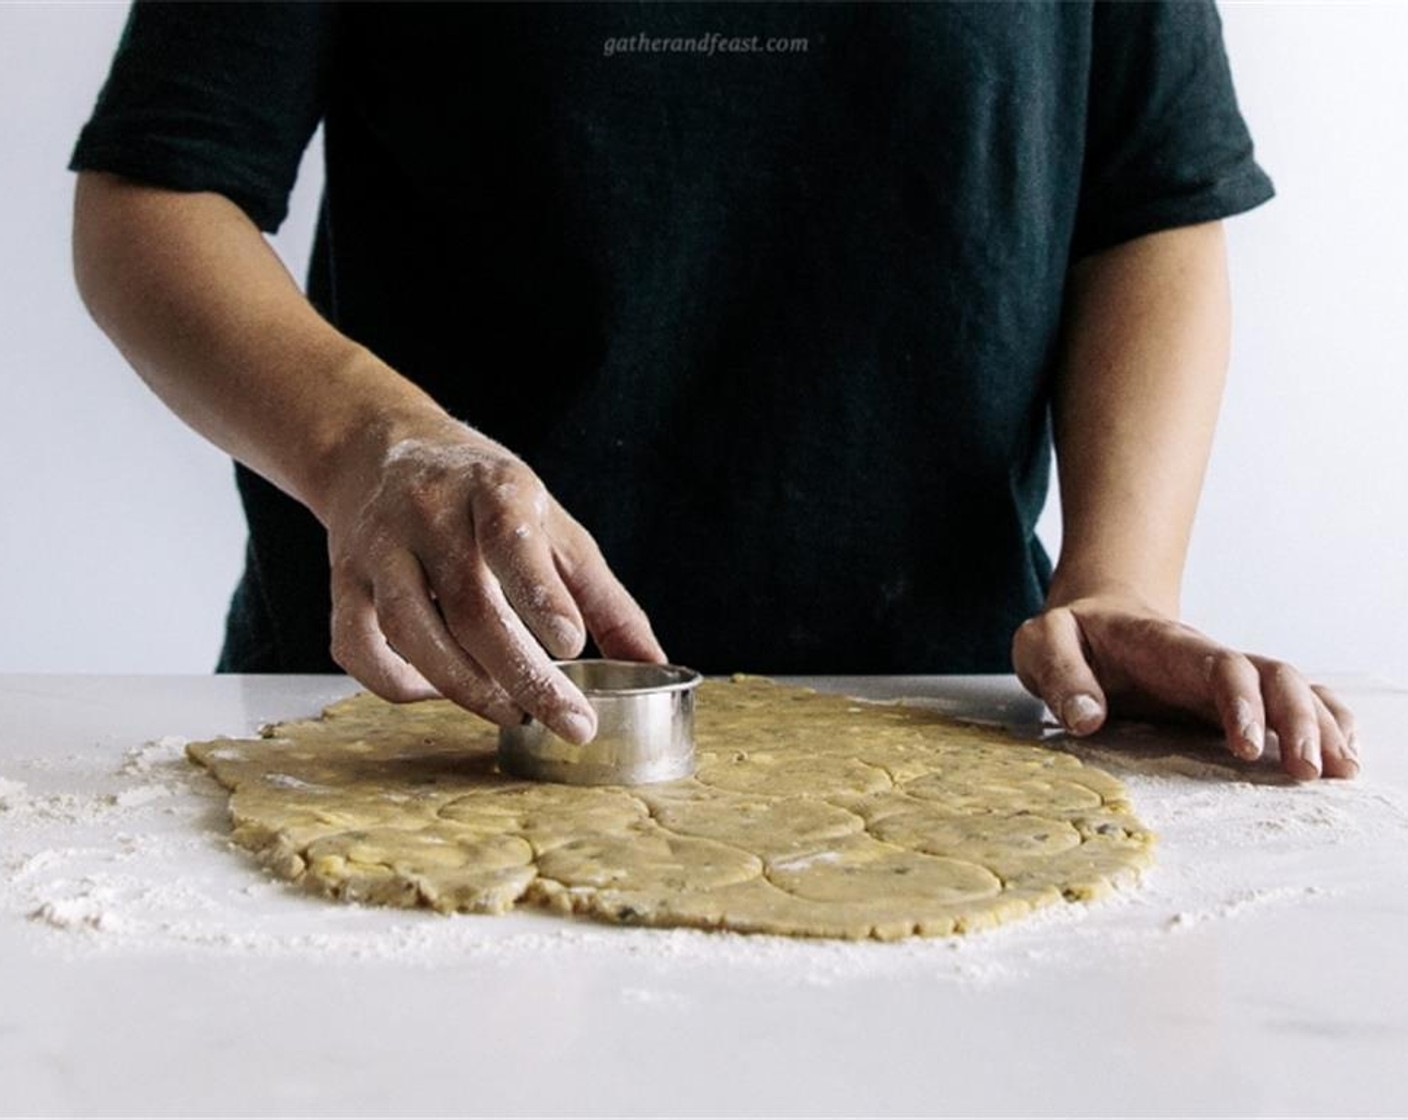 step 5 Using a rolling pin, roll the dough out until it’s about 1-centimeter thick, then cut the dough into 6-centimeter rounds using a cookie cutter.